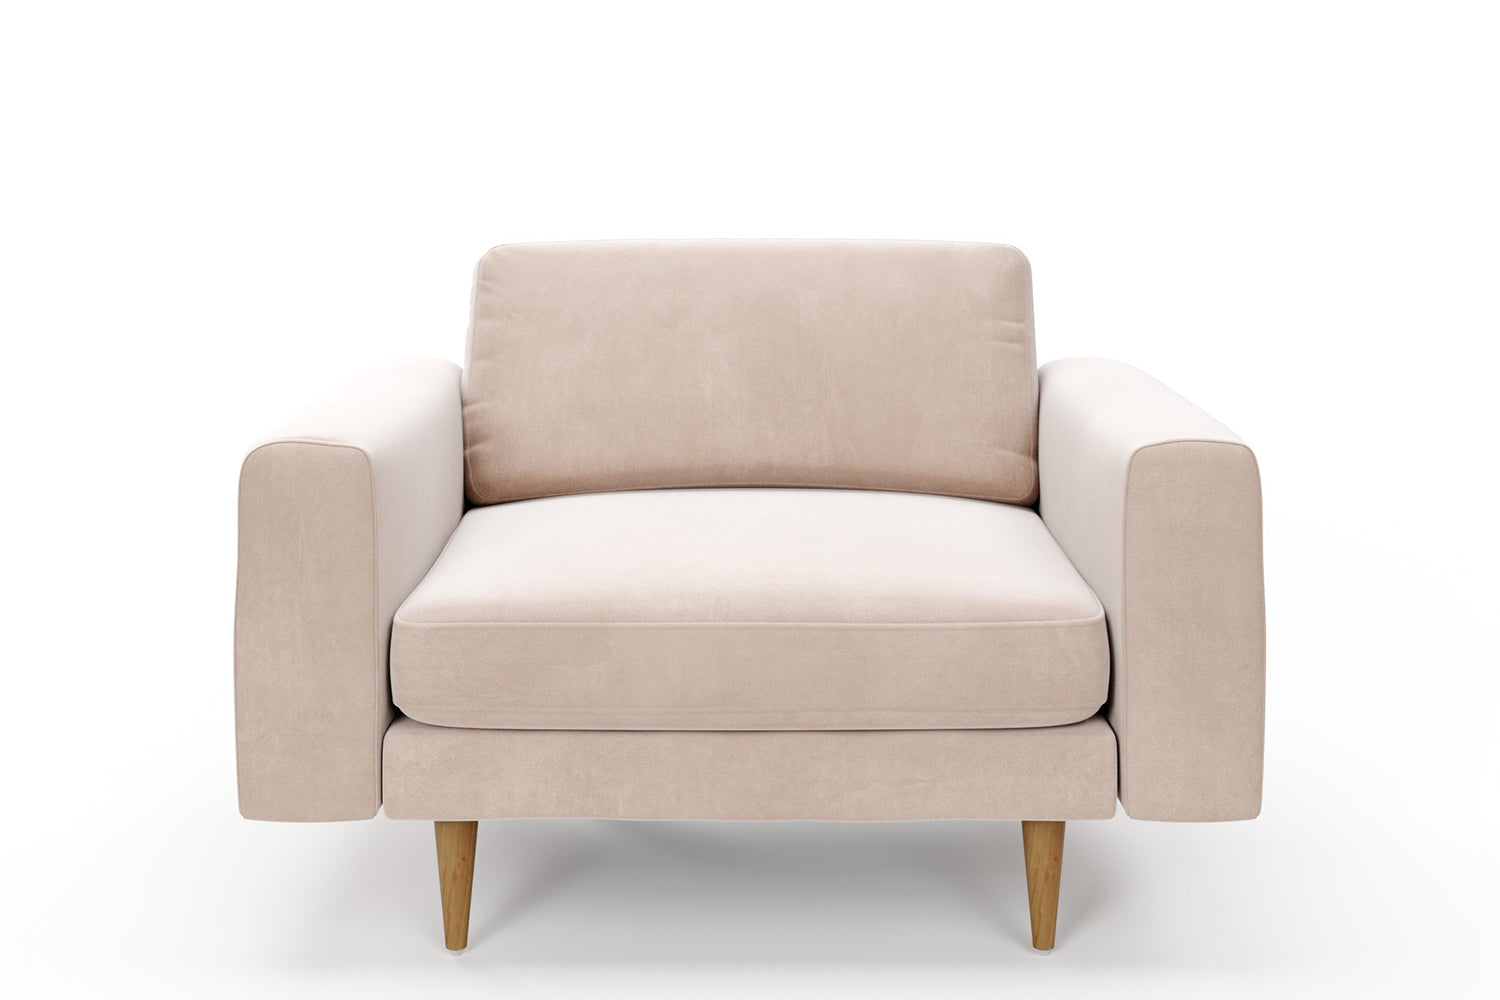 SNUG | The Big Chill 1.5 Seater Snuggler in Taupe variant_40414876467248